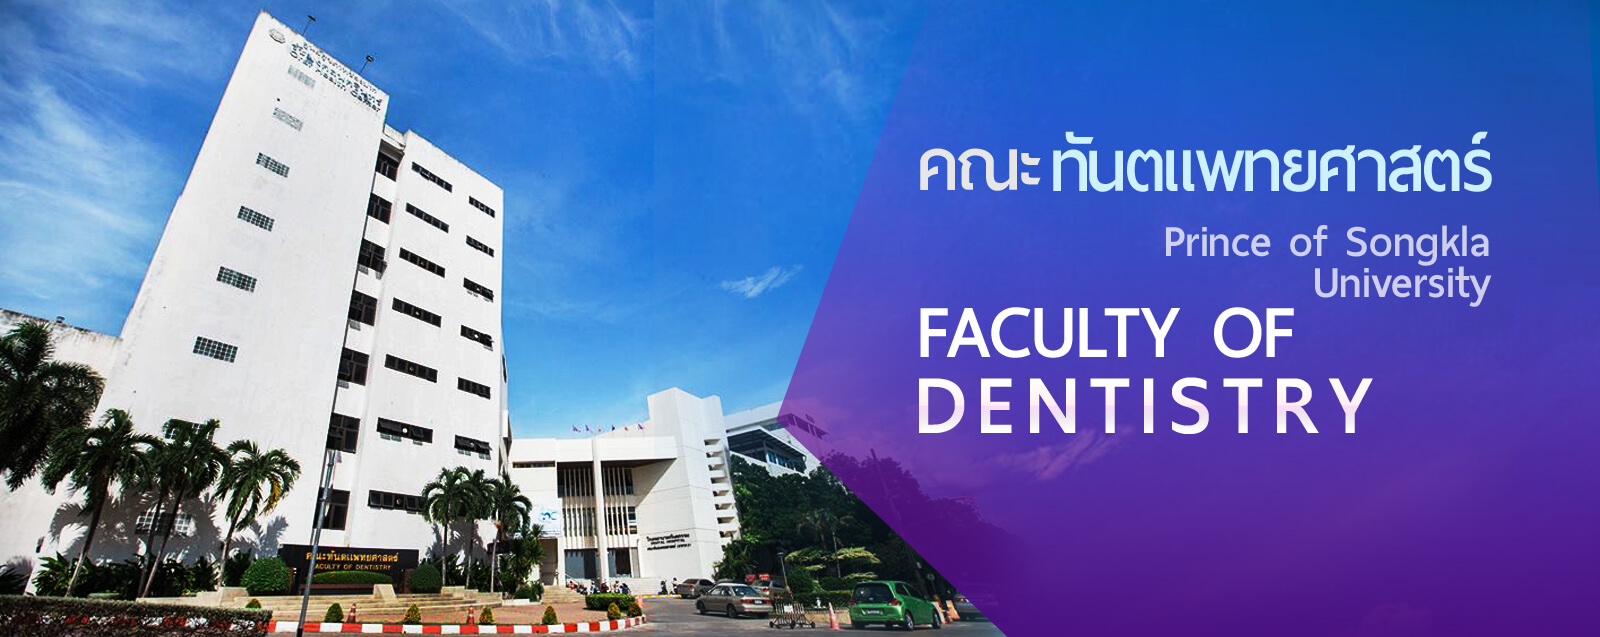 OFFICE OF RESARCH ETHICS FACULTY OF DENTISITRY PRINCE OF SONGKLA UNIVERSITY